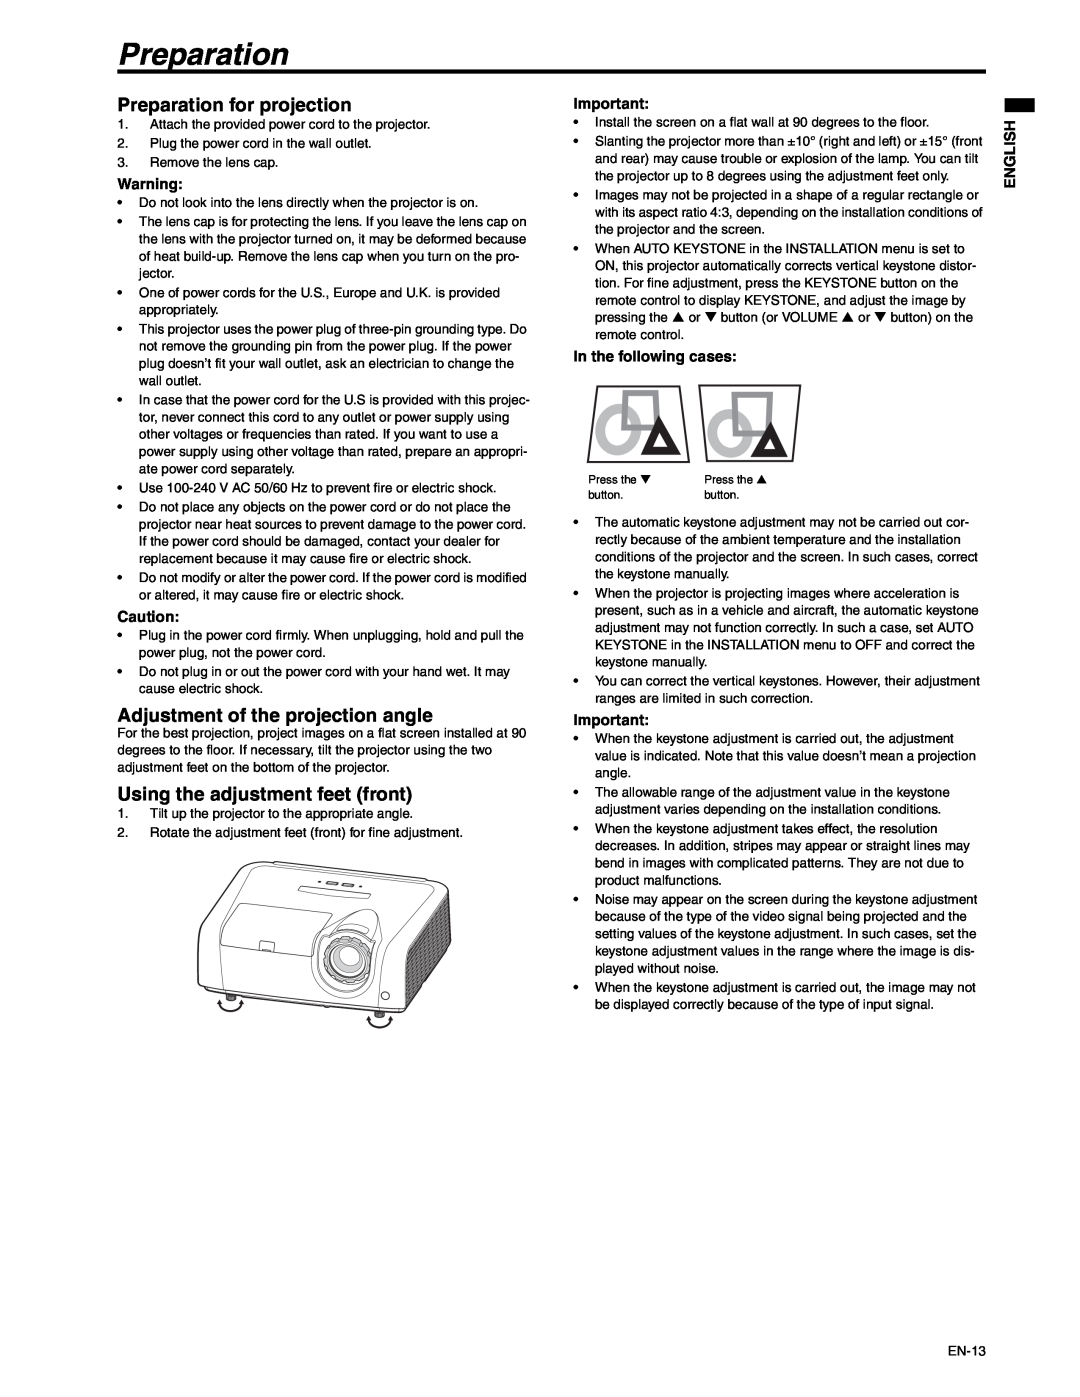 Mitsubishi Electronics XD250U-ST user manual Preparation for projection, Adjustment of the projection angle, English 